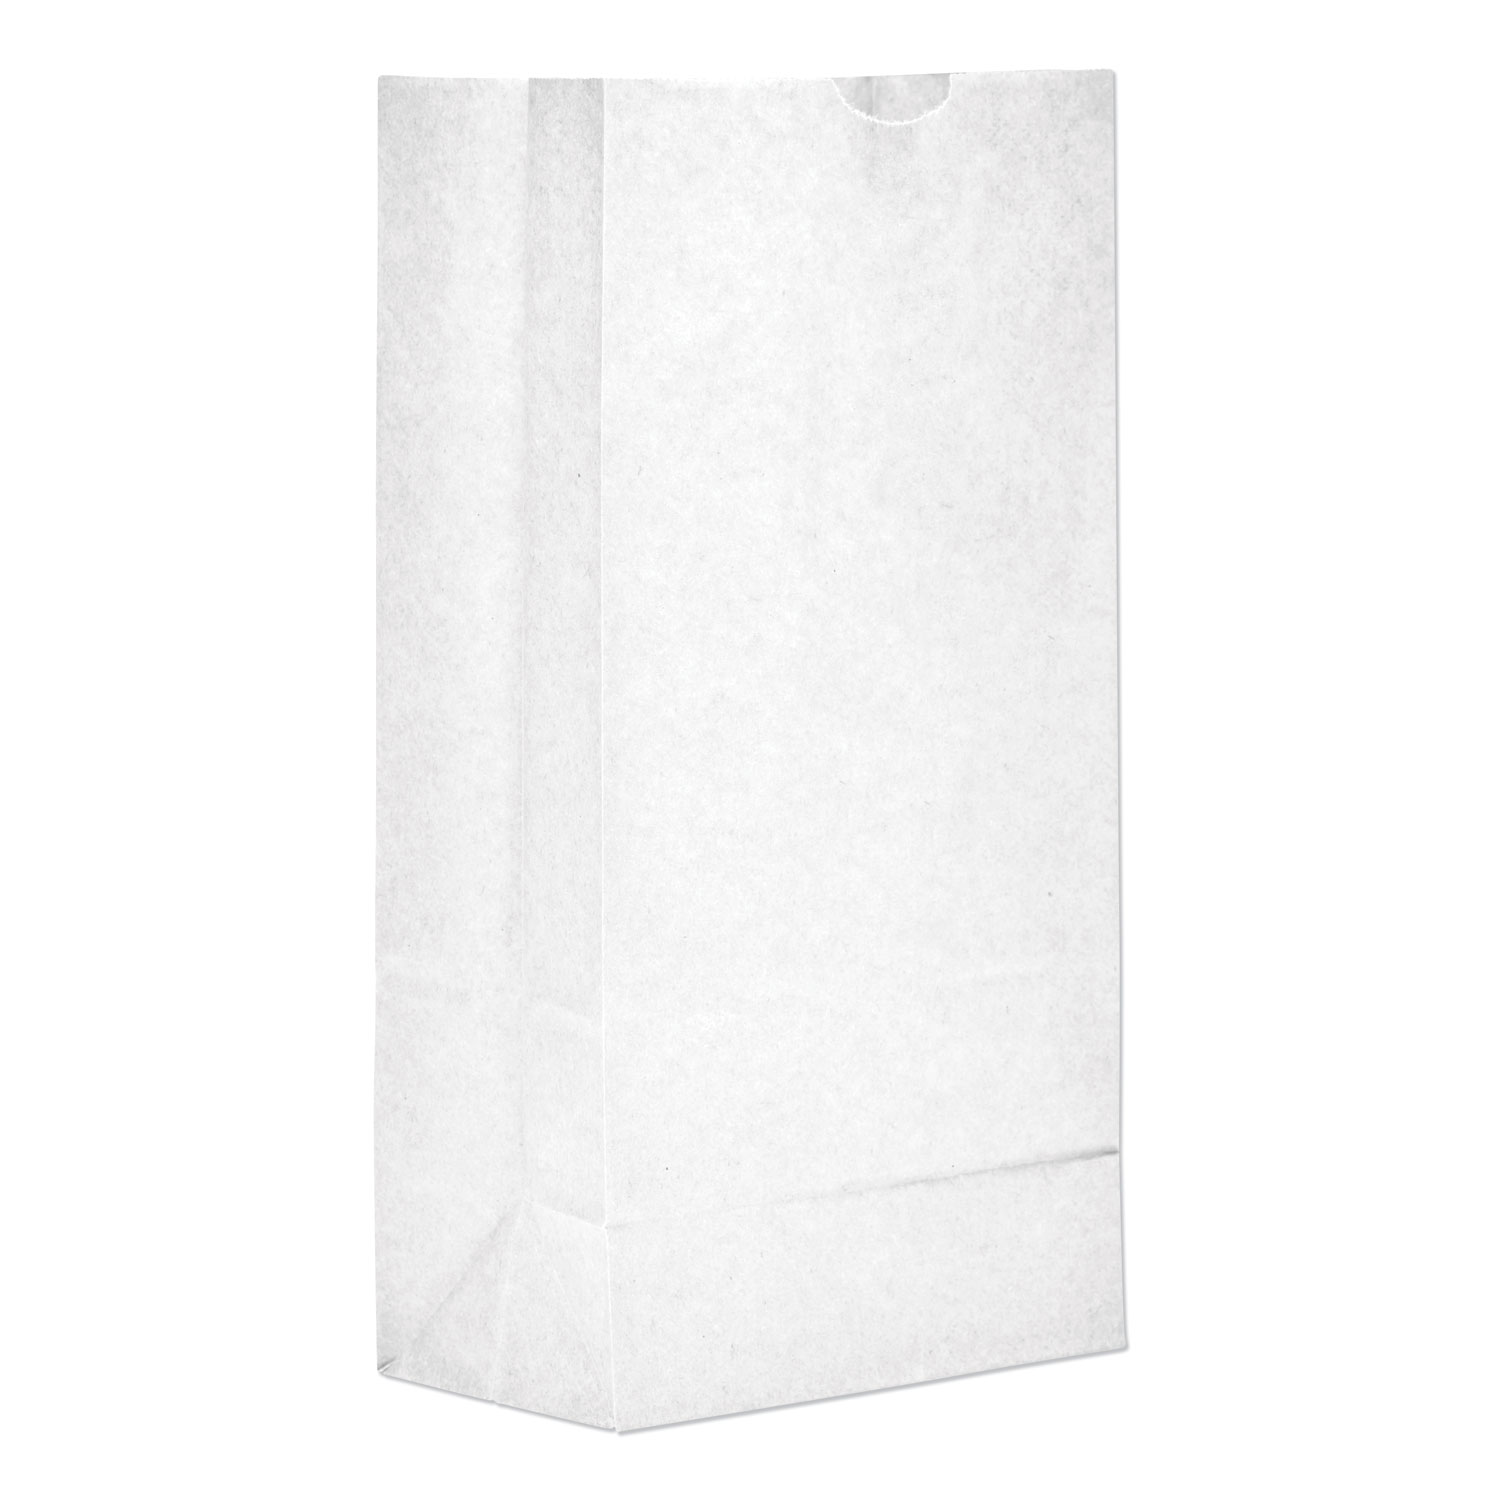  General 51028 Grocery Paper Bags, 35 lbs Capacity, #8, 6.13w x 4.17d x 12.44h, White, 500 Bags (BAGGW8500) 